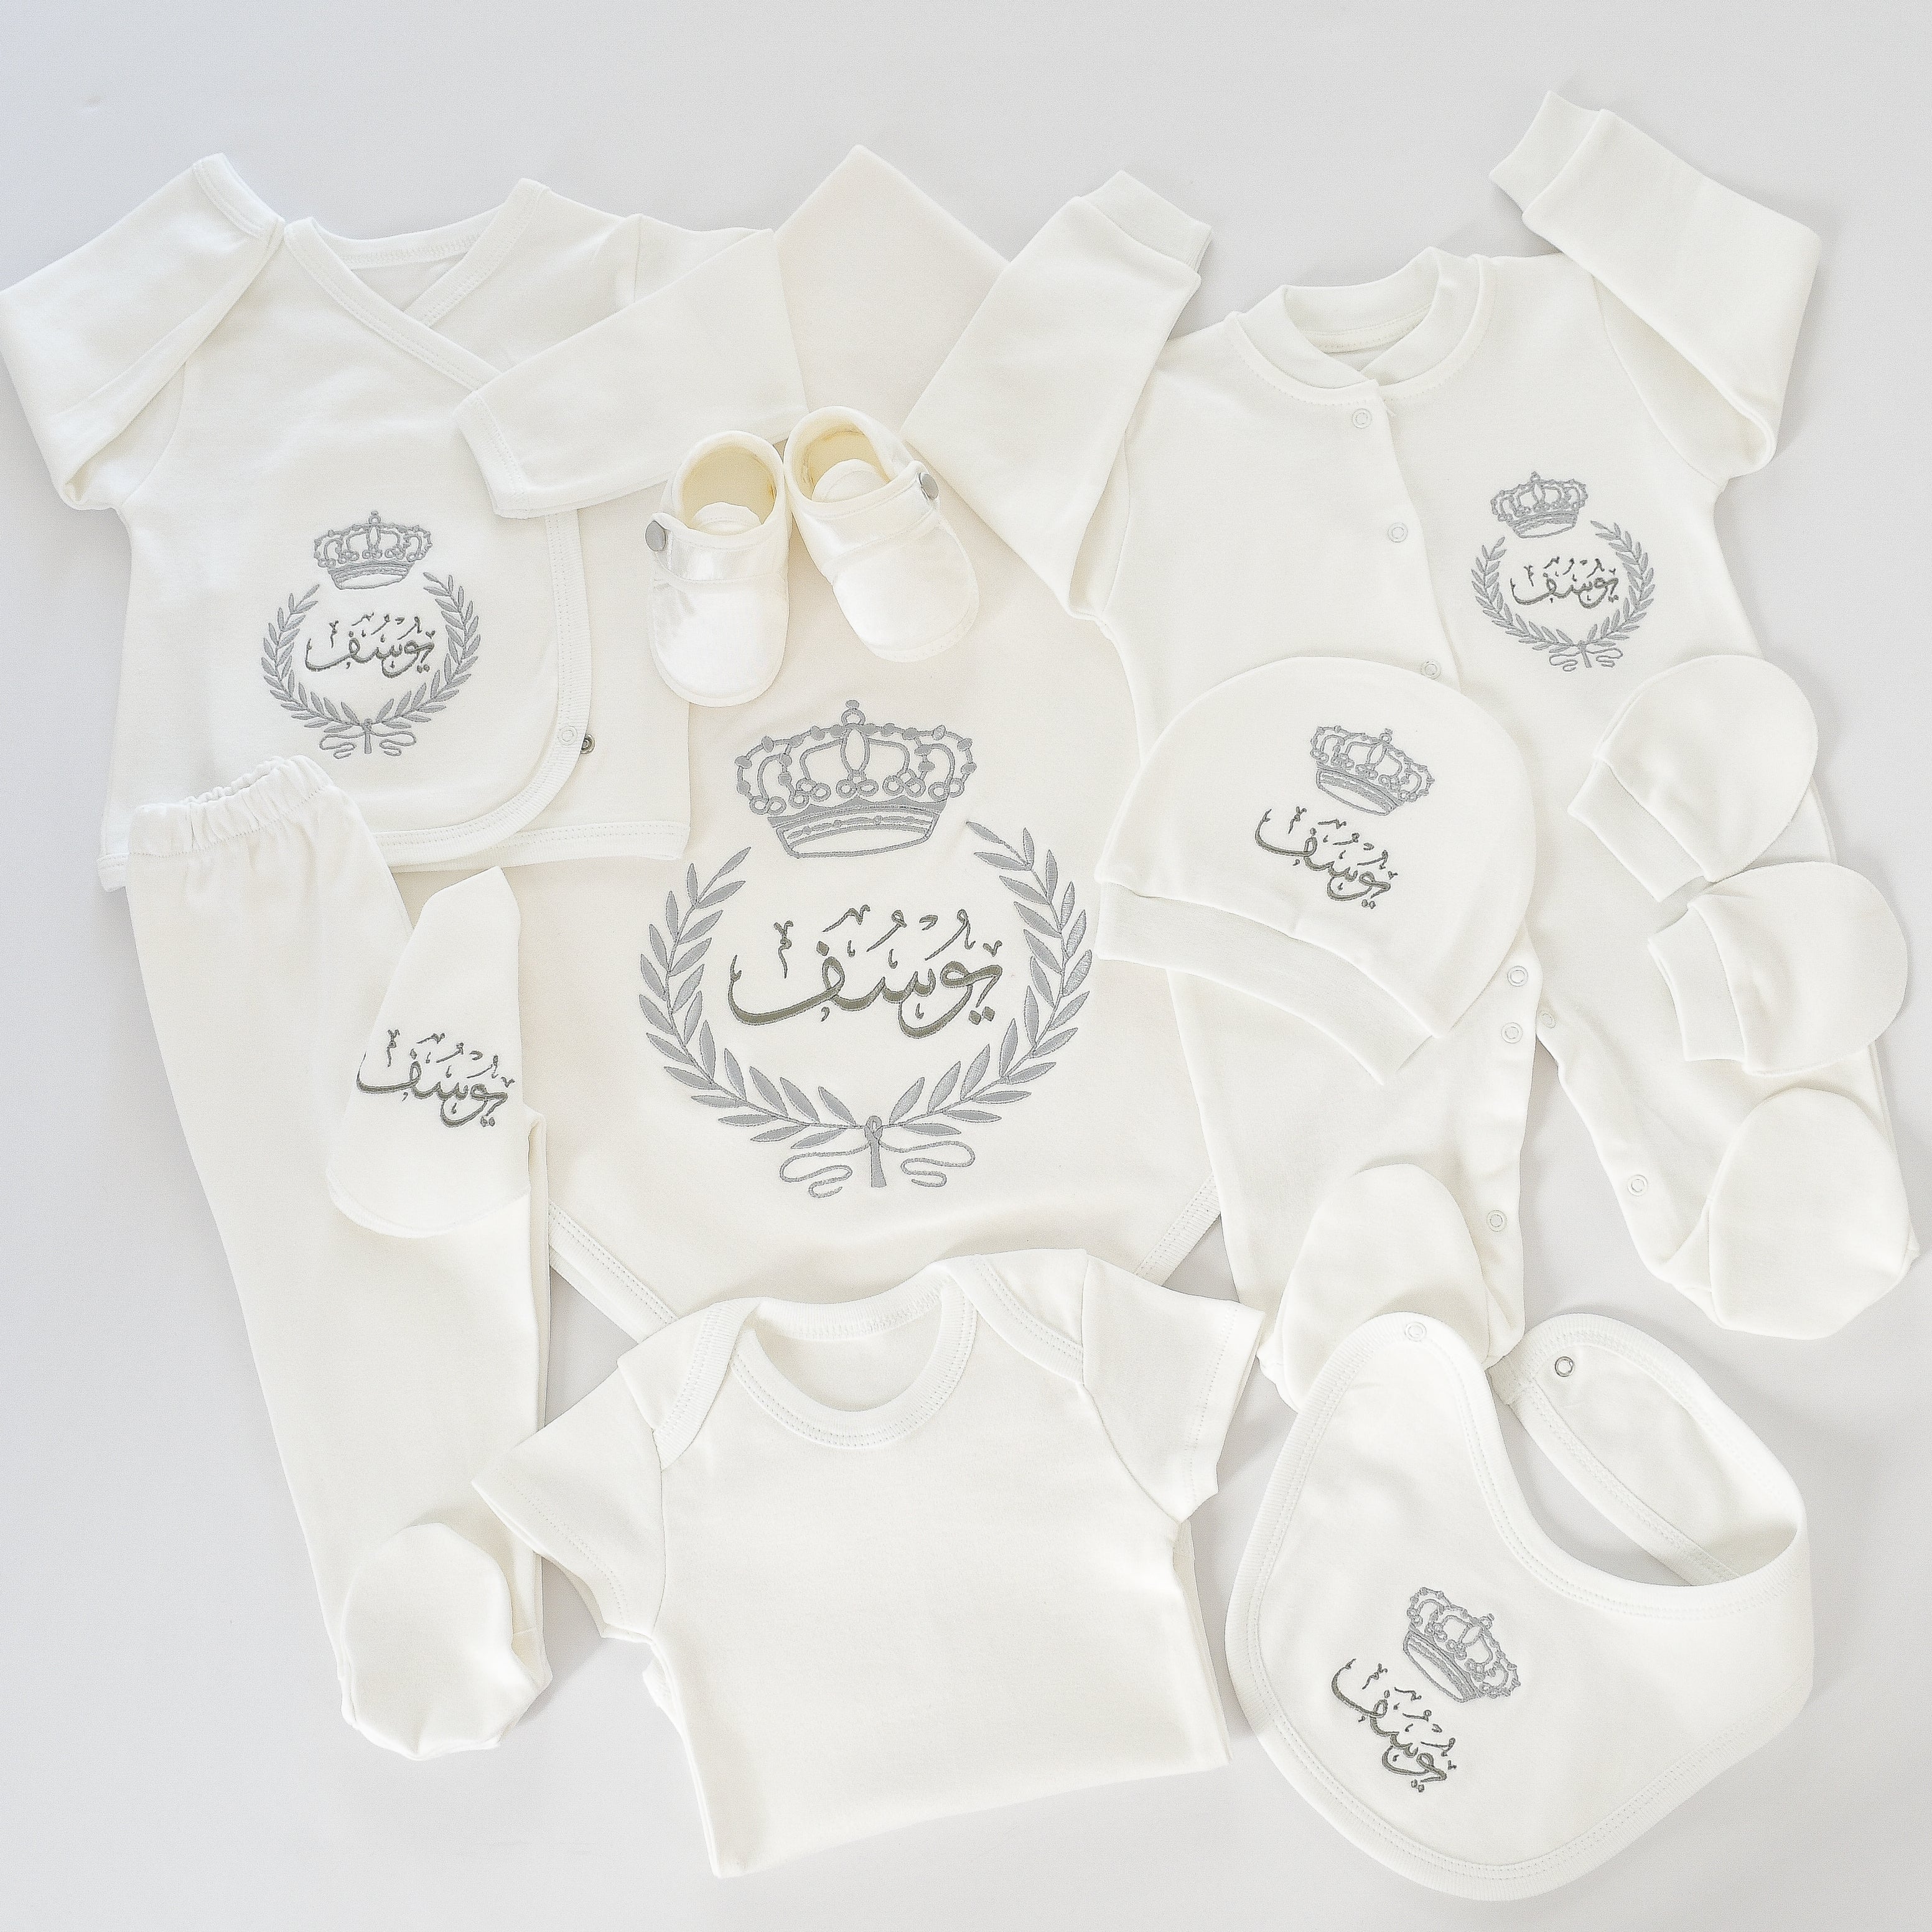 New Born Baby Boy And Baby Girl Clothing Set |0-3 Months| 0-6 Months| Daily  Wear Very Soft Cloth Dress | Cotton Dress| Pack Of 5